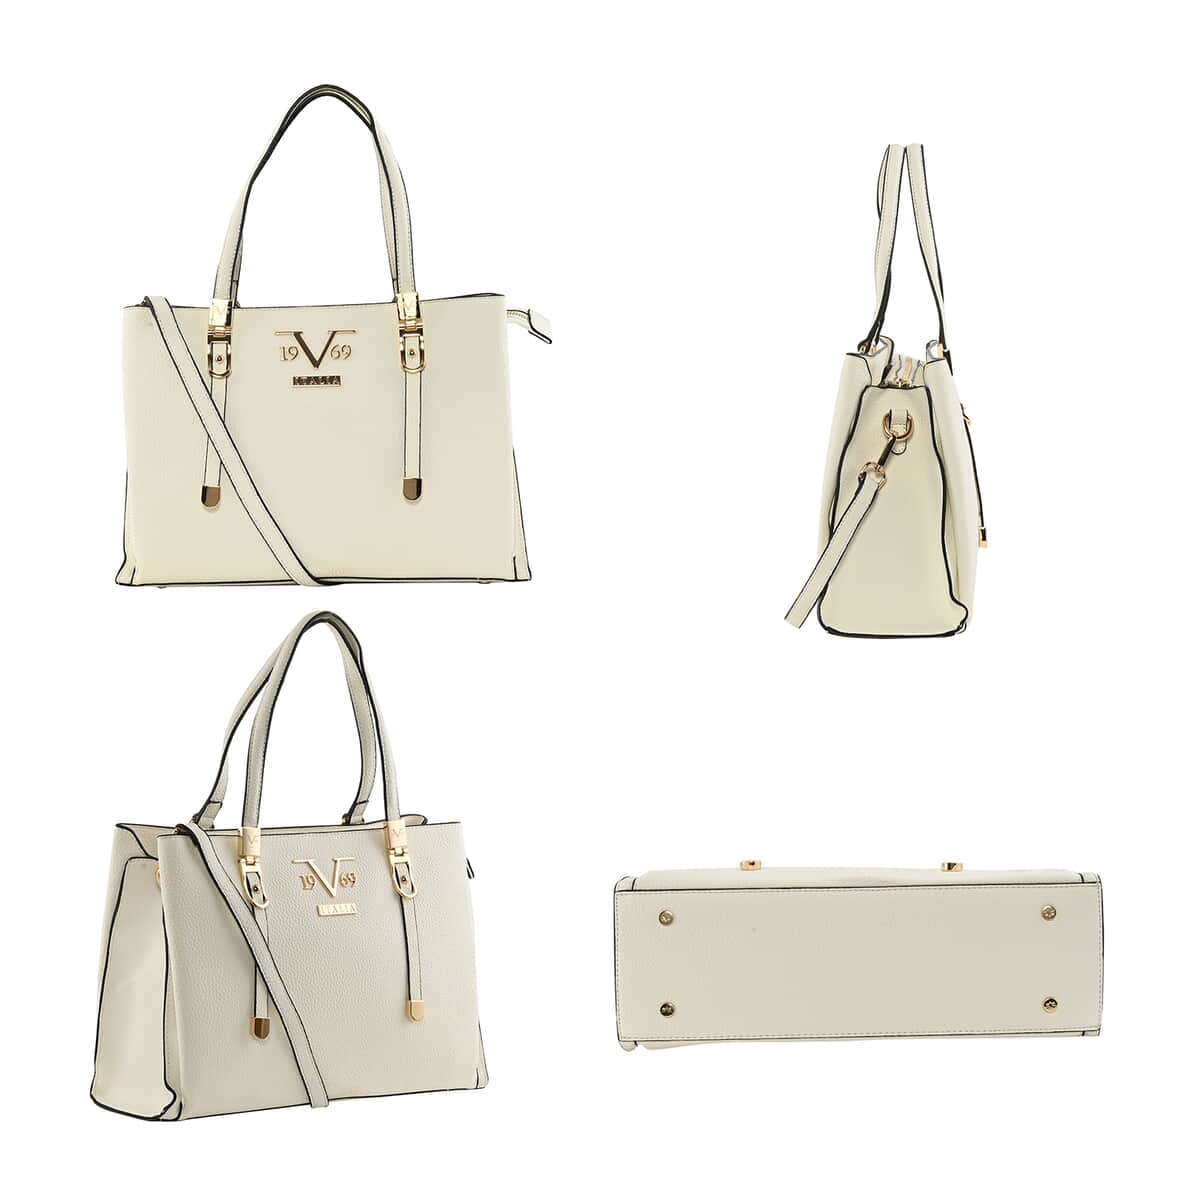 19V69 ITALIA by Alessandro Versace Pebble Texture Faux Leather Tote Bag with Magnetic Closure - White image number 1